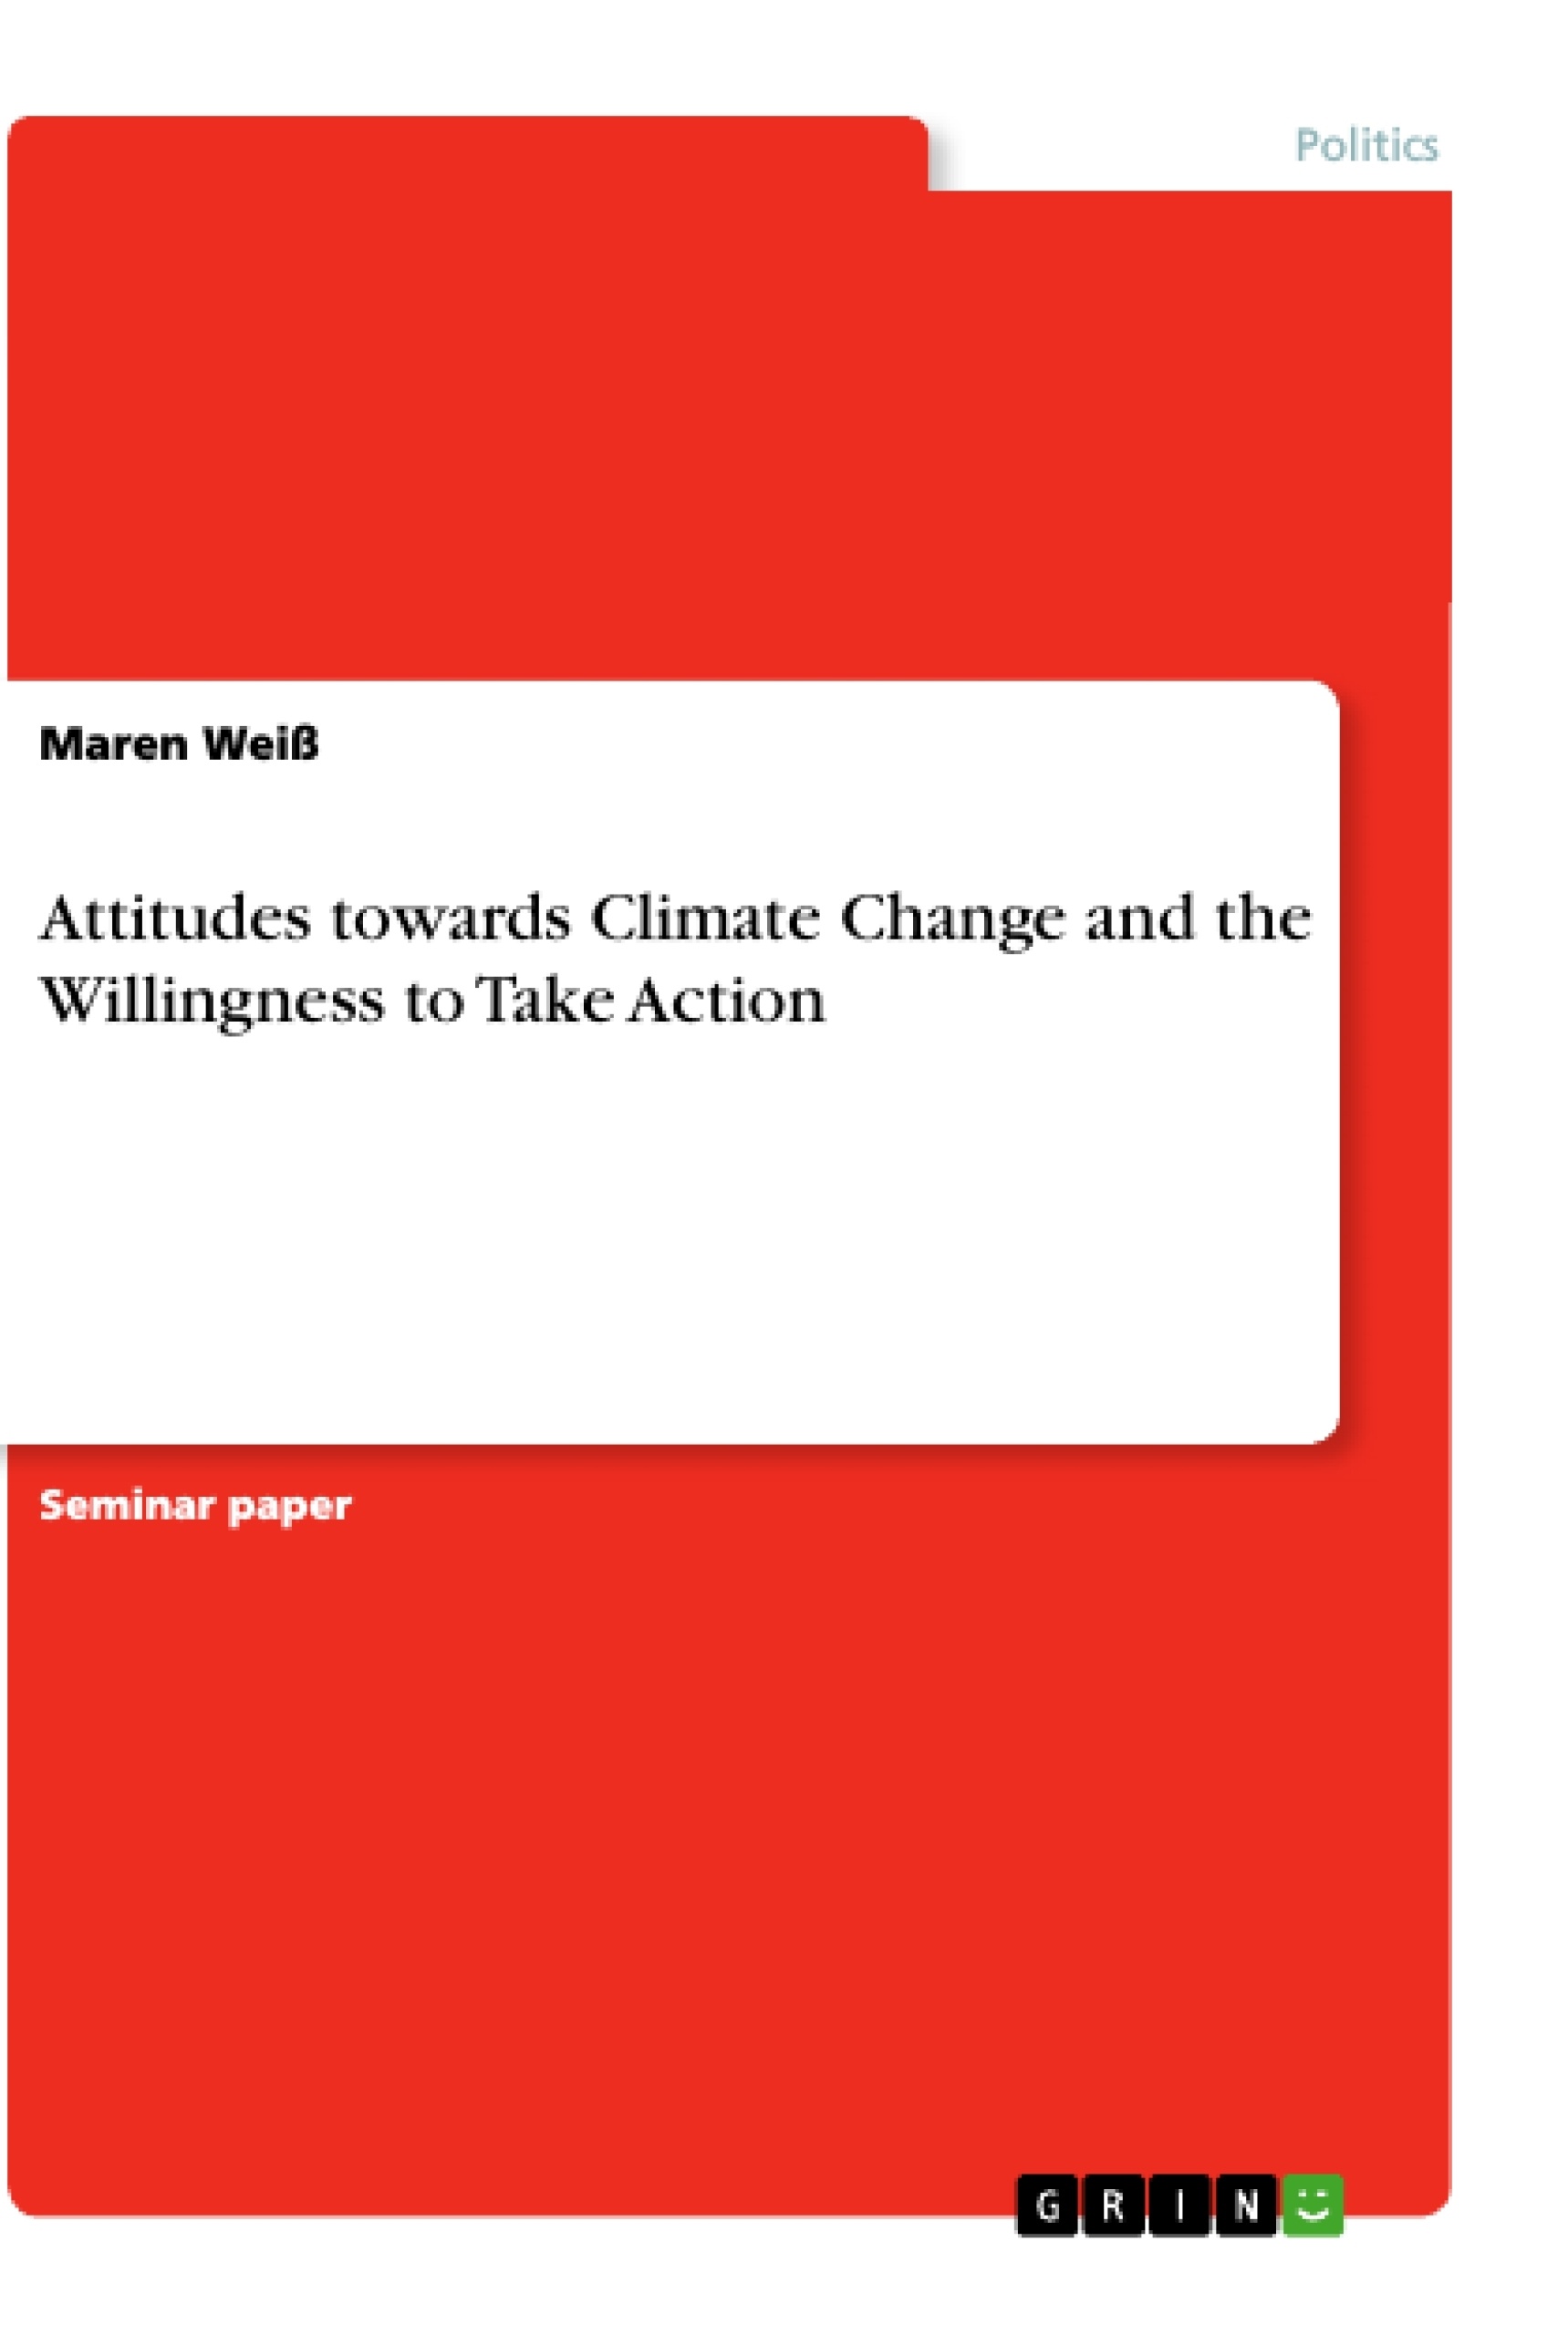 Title: Attitudes towards Climate Change and the Willingness to Take Action